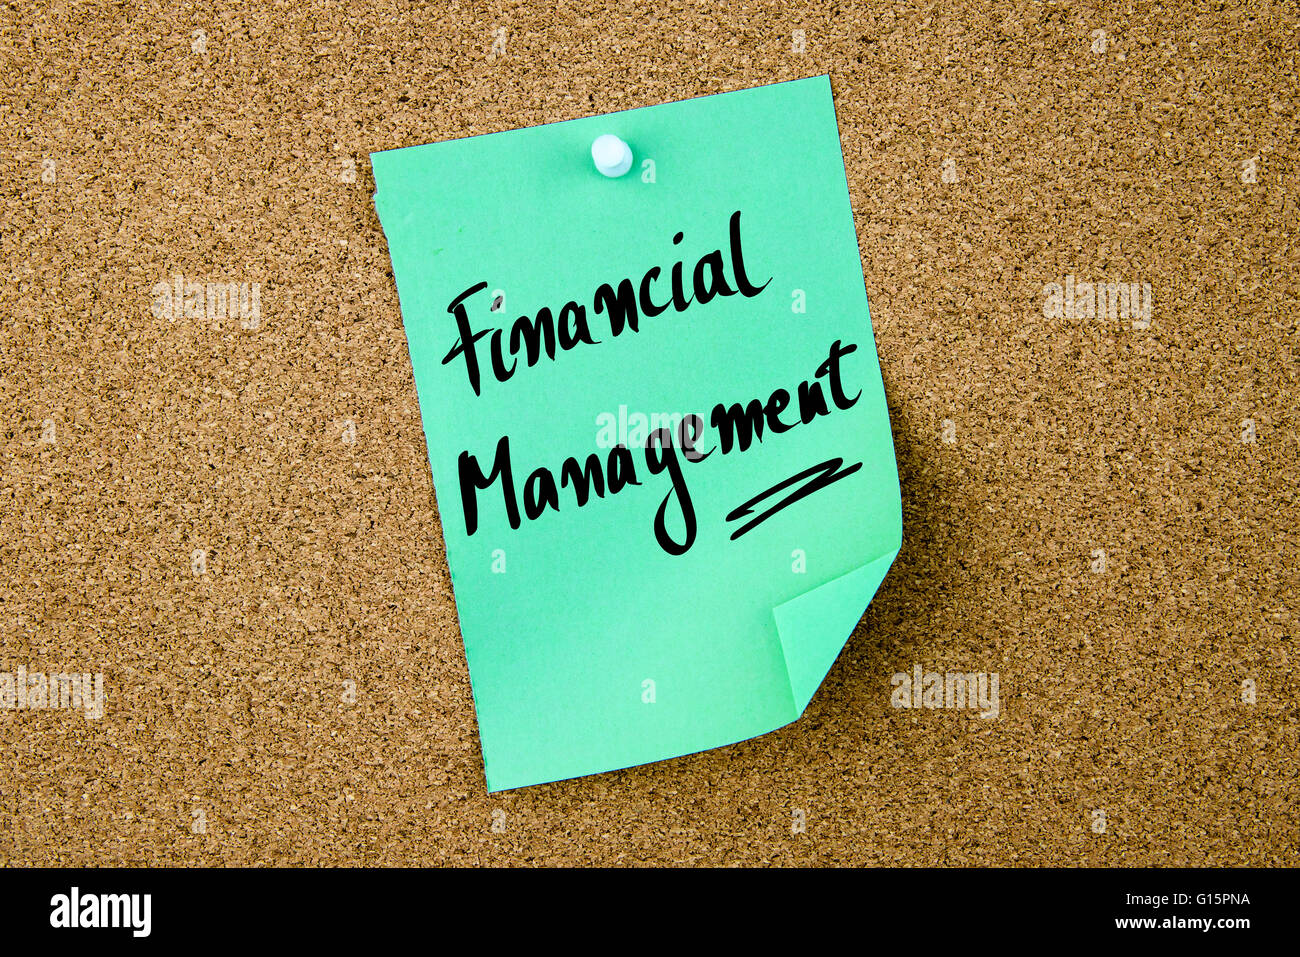 Financial Management written on green paper note pinned on cork board with white thumbtacks, copy space available Stock Photo